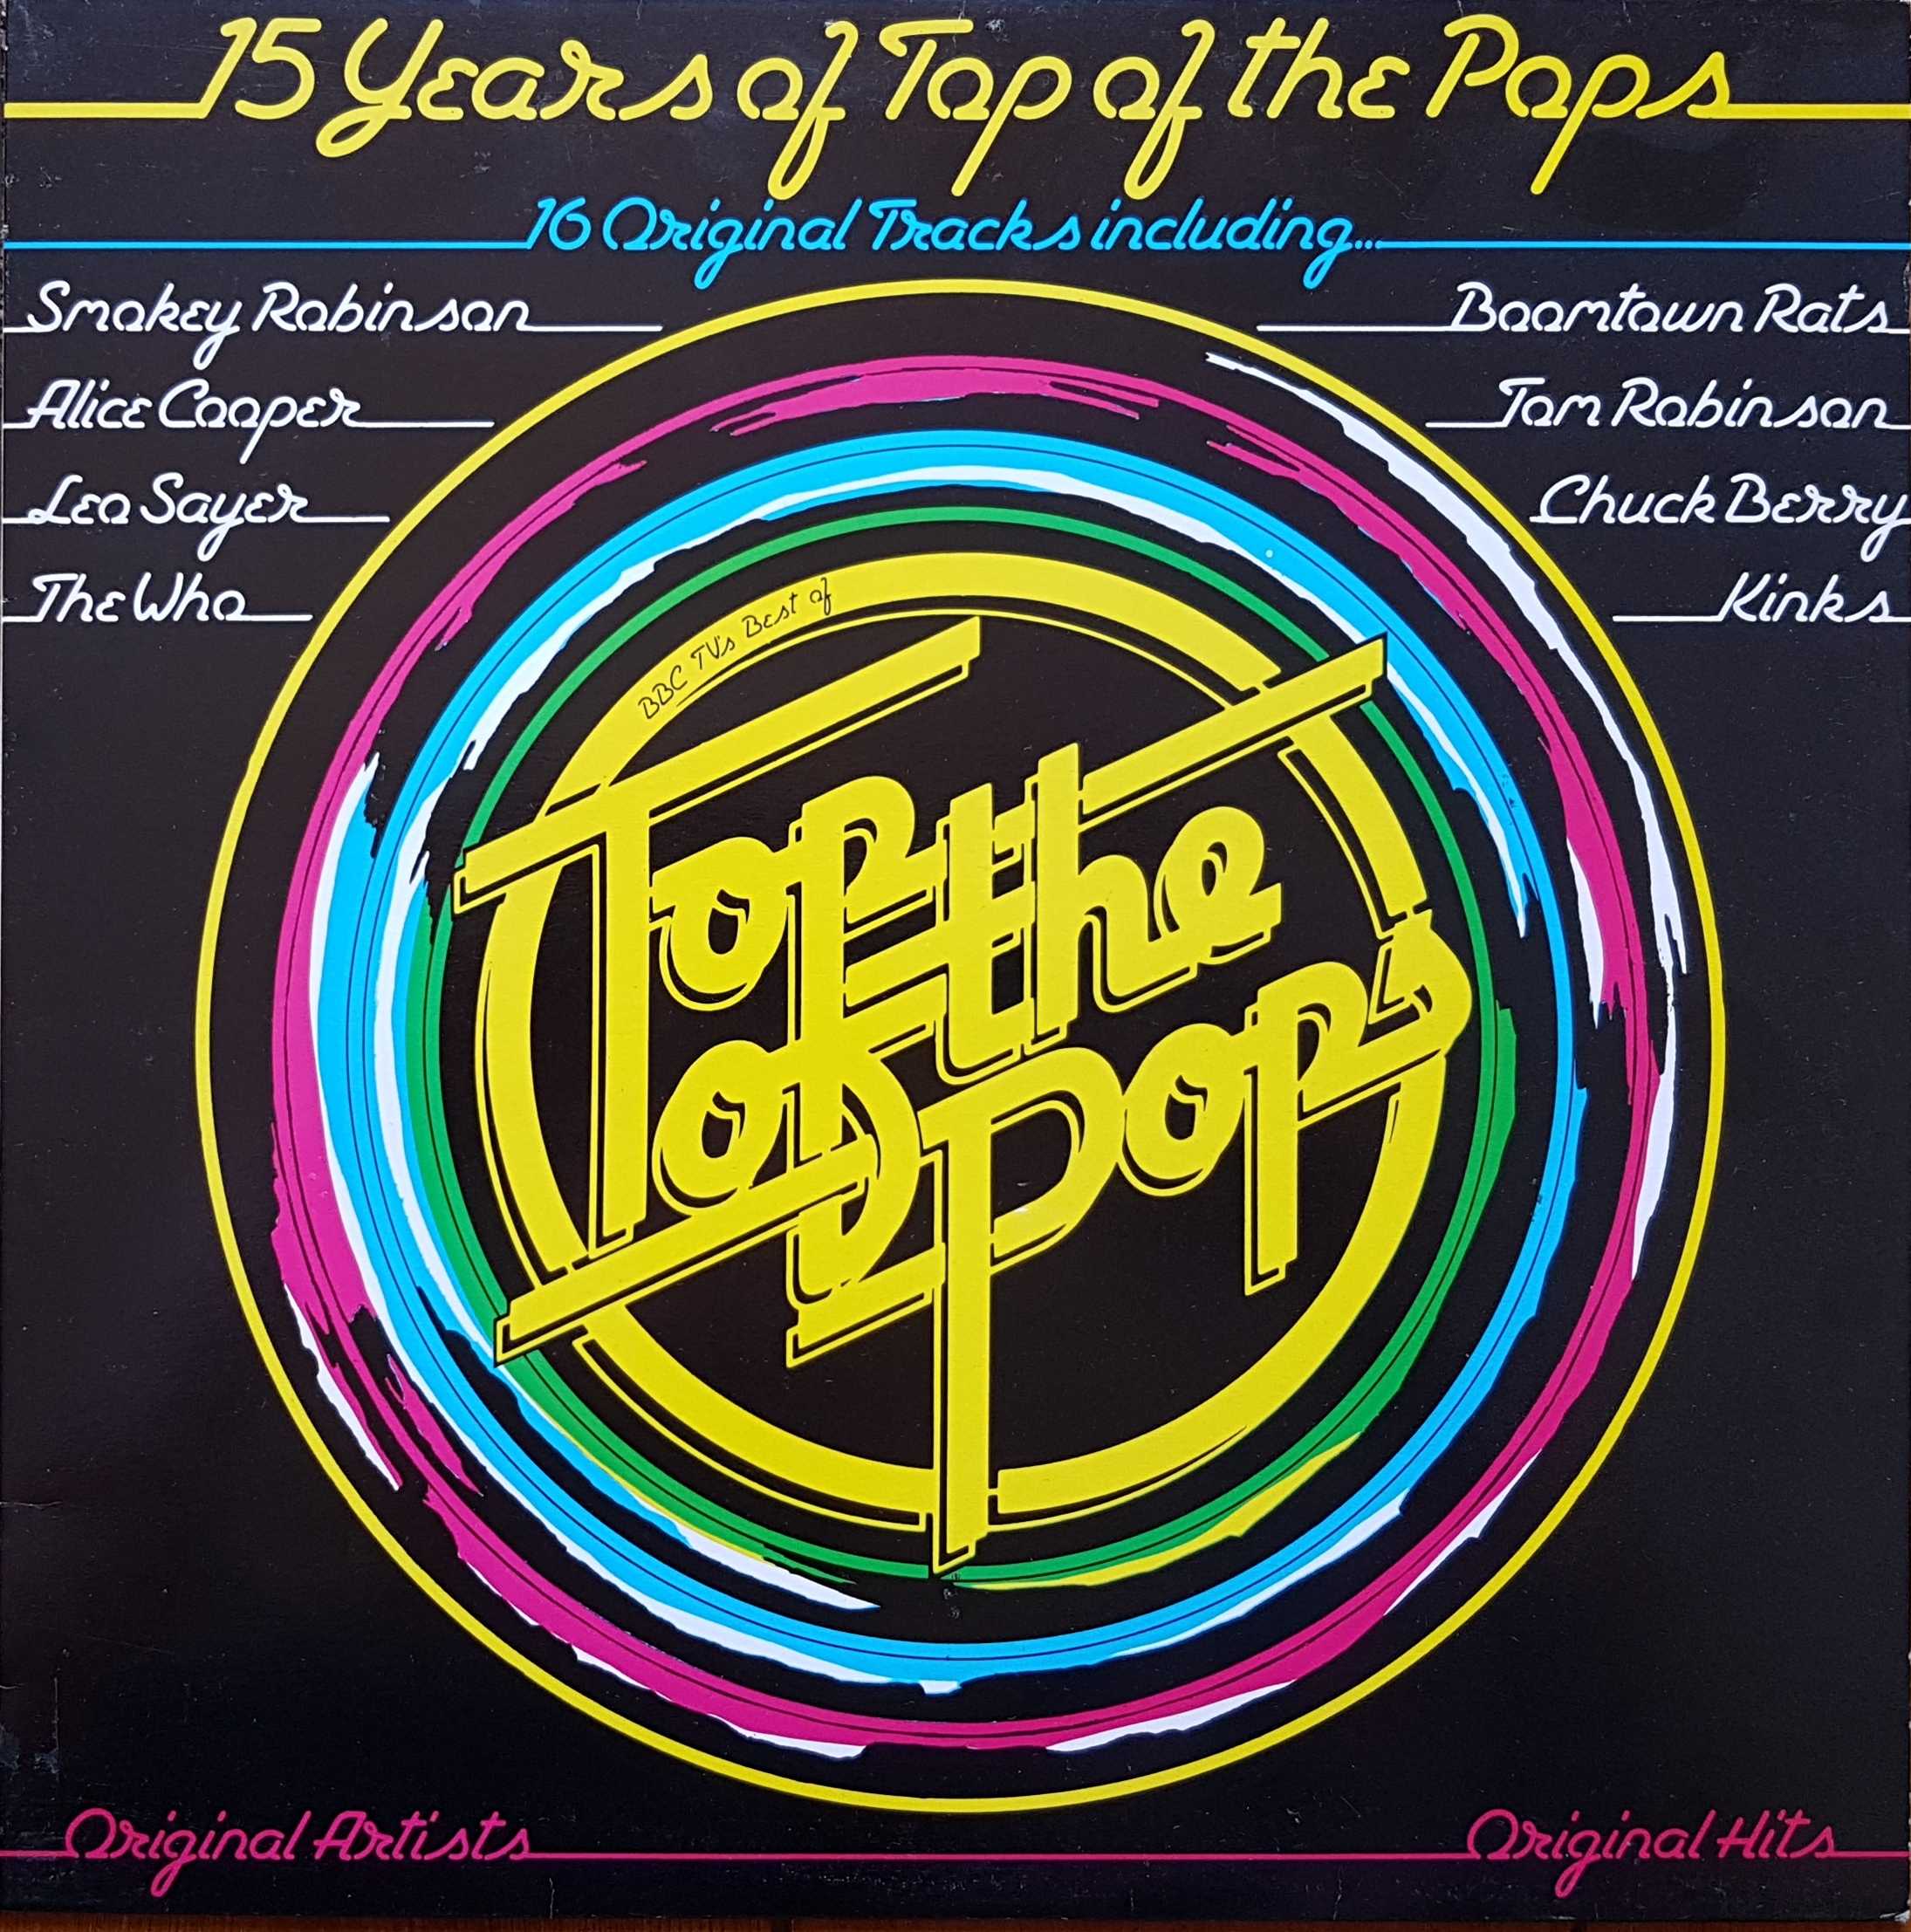 Picture of BELP 014 15 years of top of the pops (Top of the pops volume 7) by artist Various from the BBC albums - Records and Tapes library